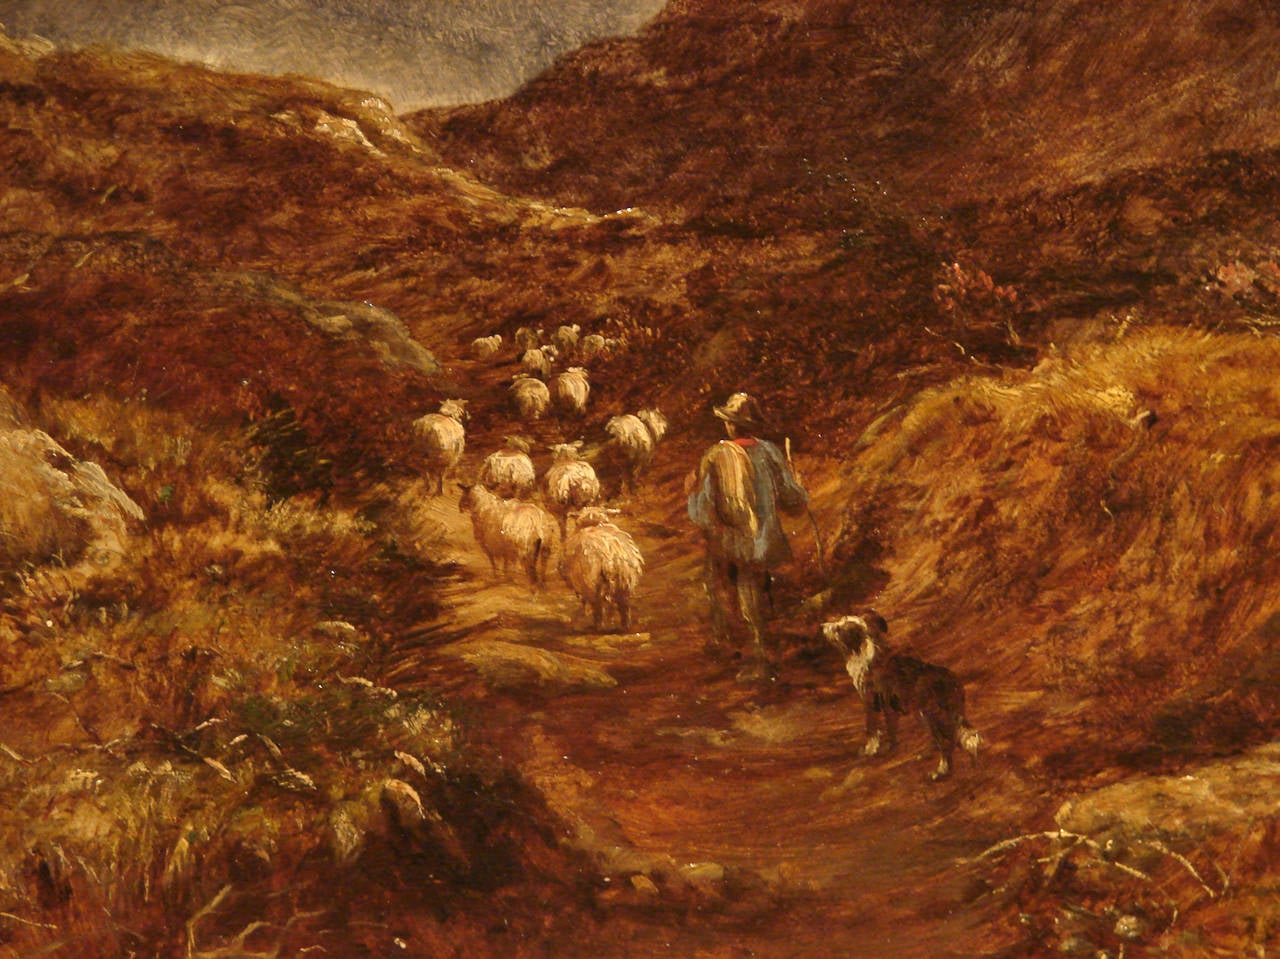 A well-painted Scottish oil on canvas of a landscape depicting a mountainous landscape with a shepherd and his flock and dog in the foreground, signed indistinctly, lower left, possibly Sherbourne, circa 1870.